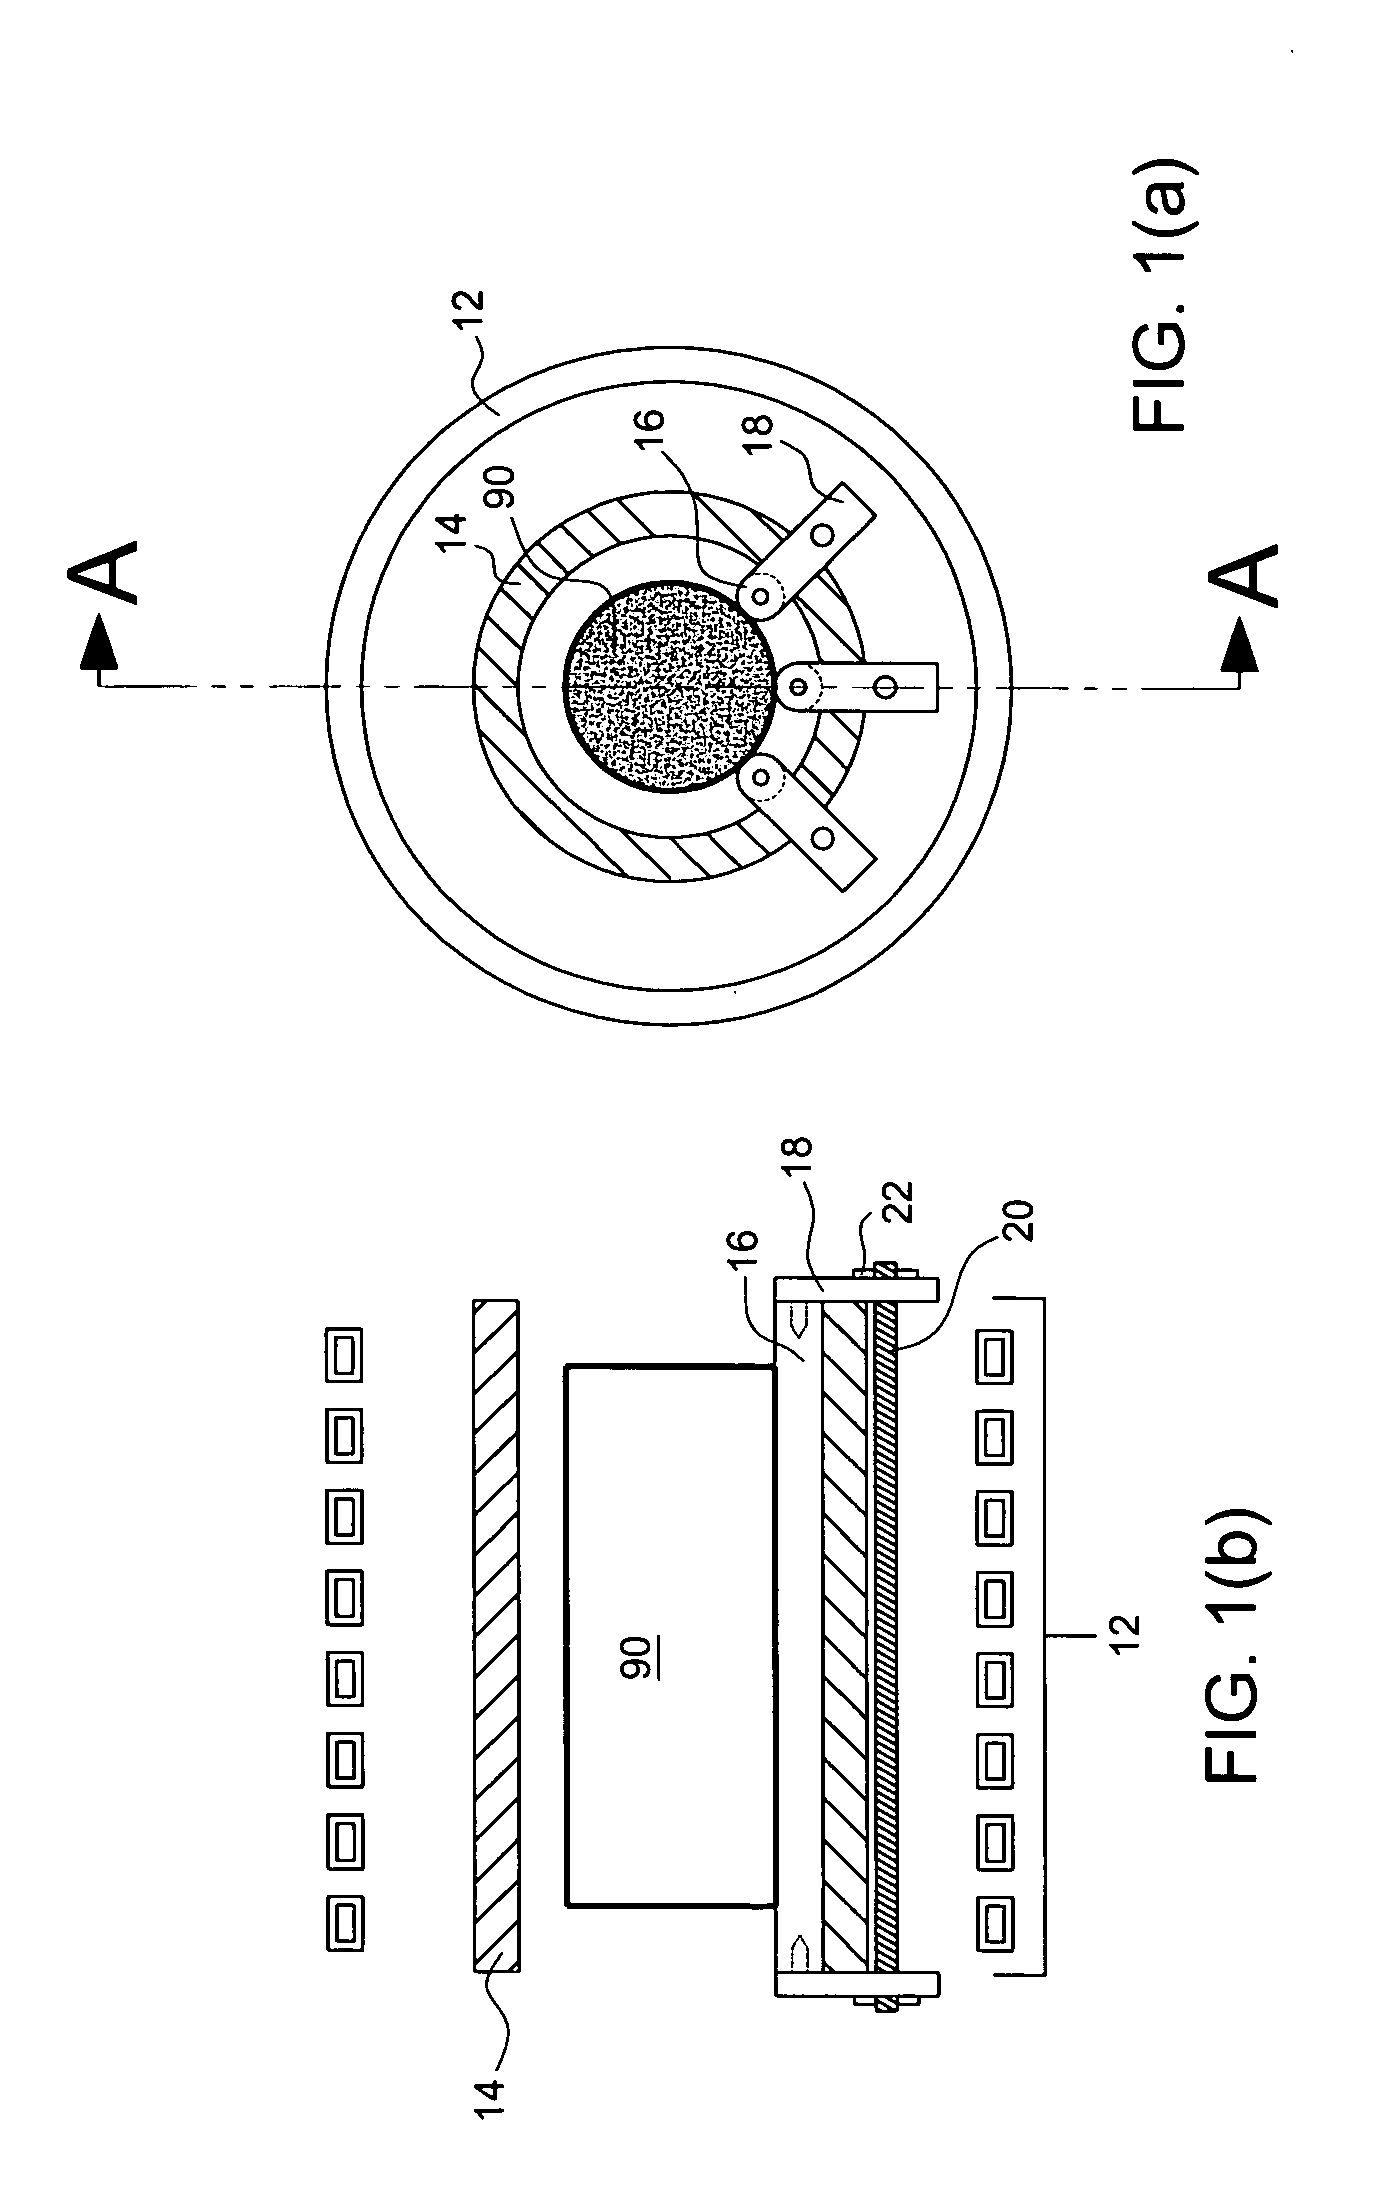 Billet support system for induction heating